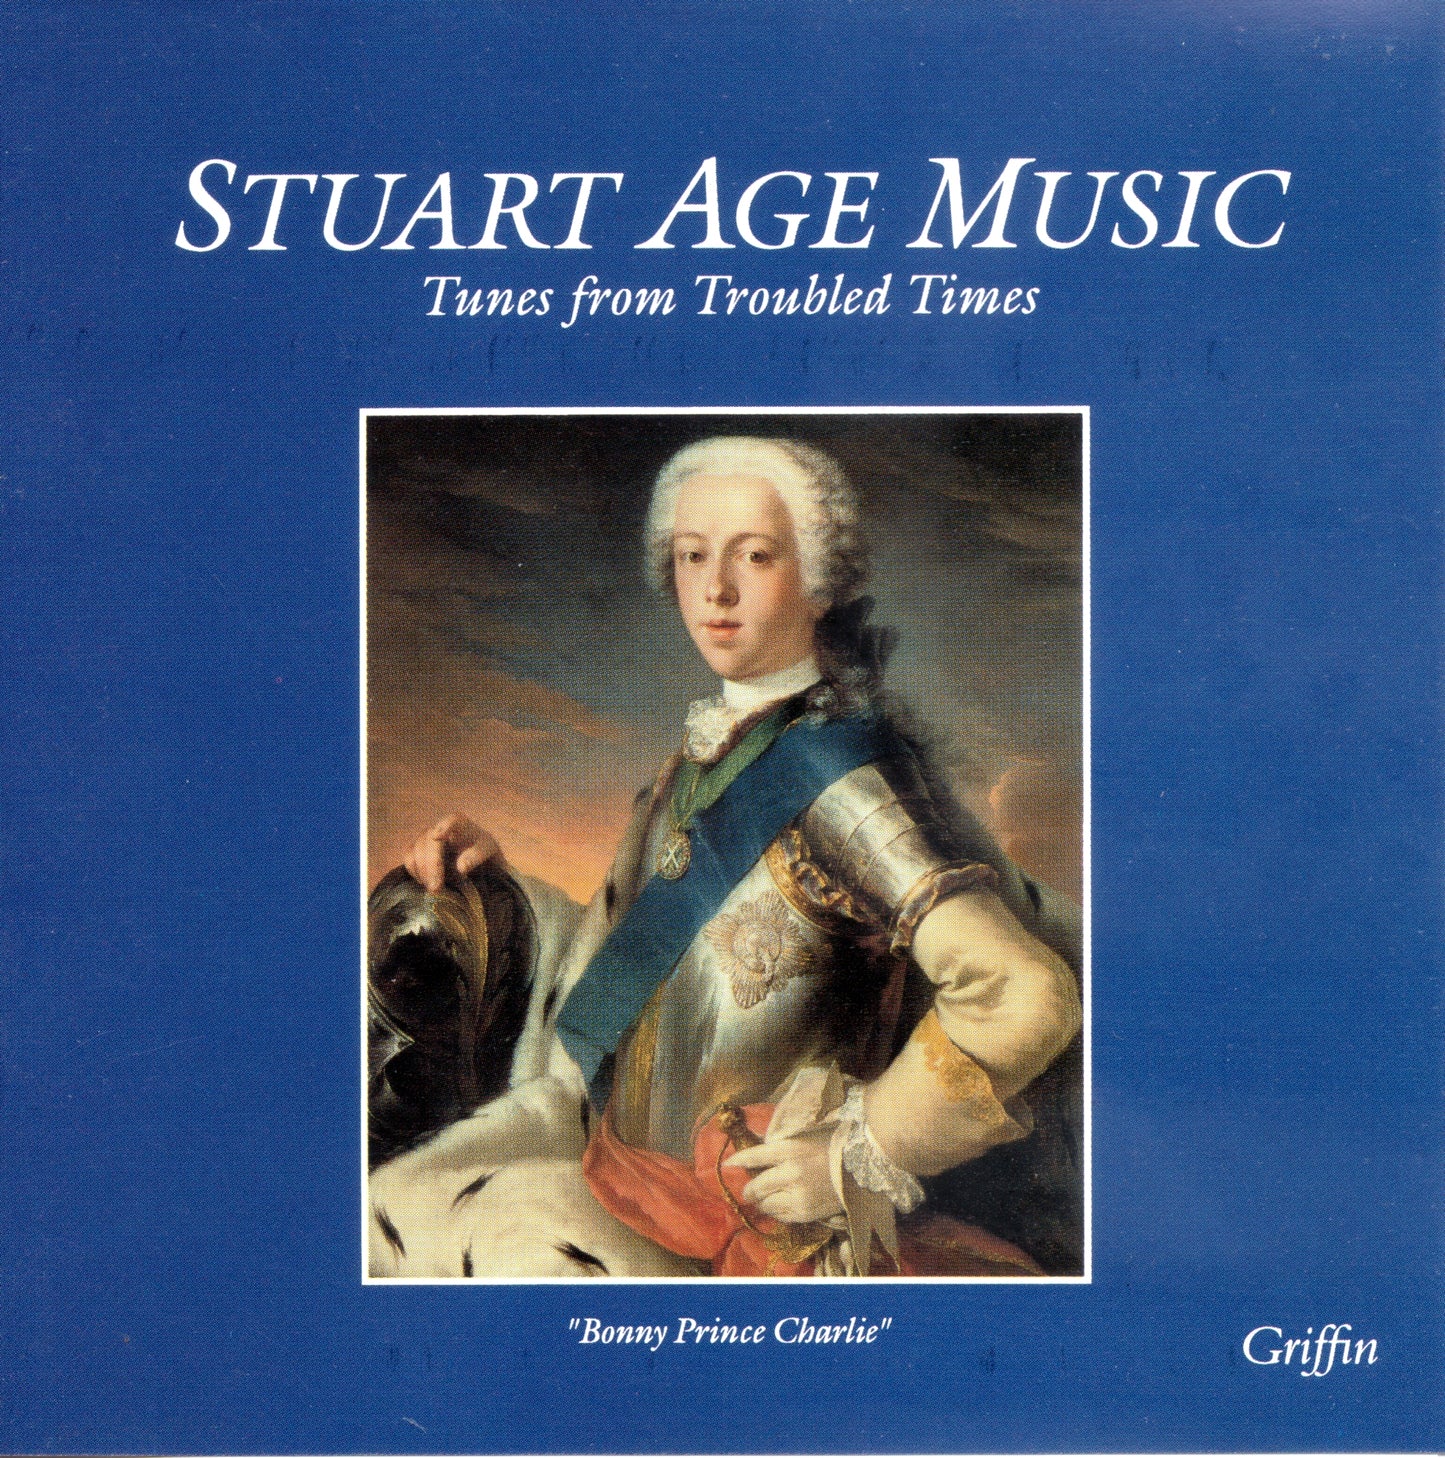 STUART AGE MUSIC (TUNES FROM TROUBLED TIMES) - SIRINU